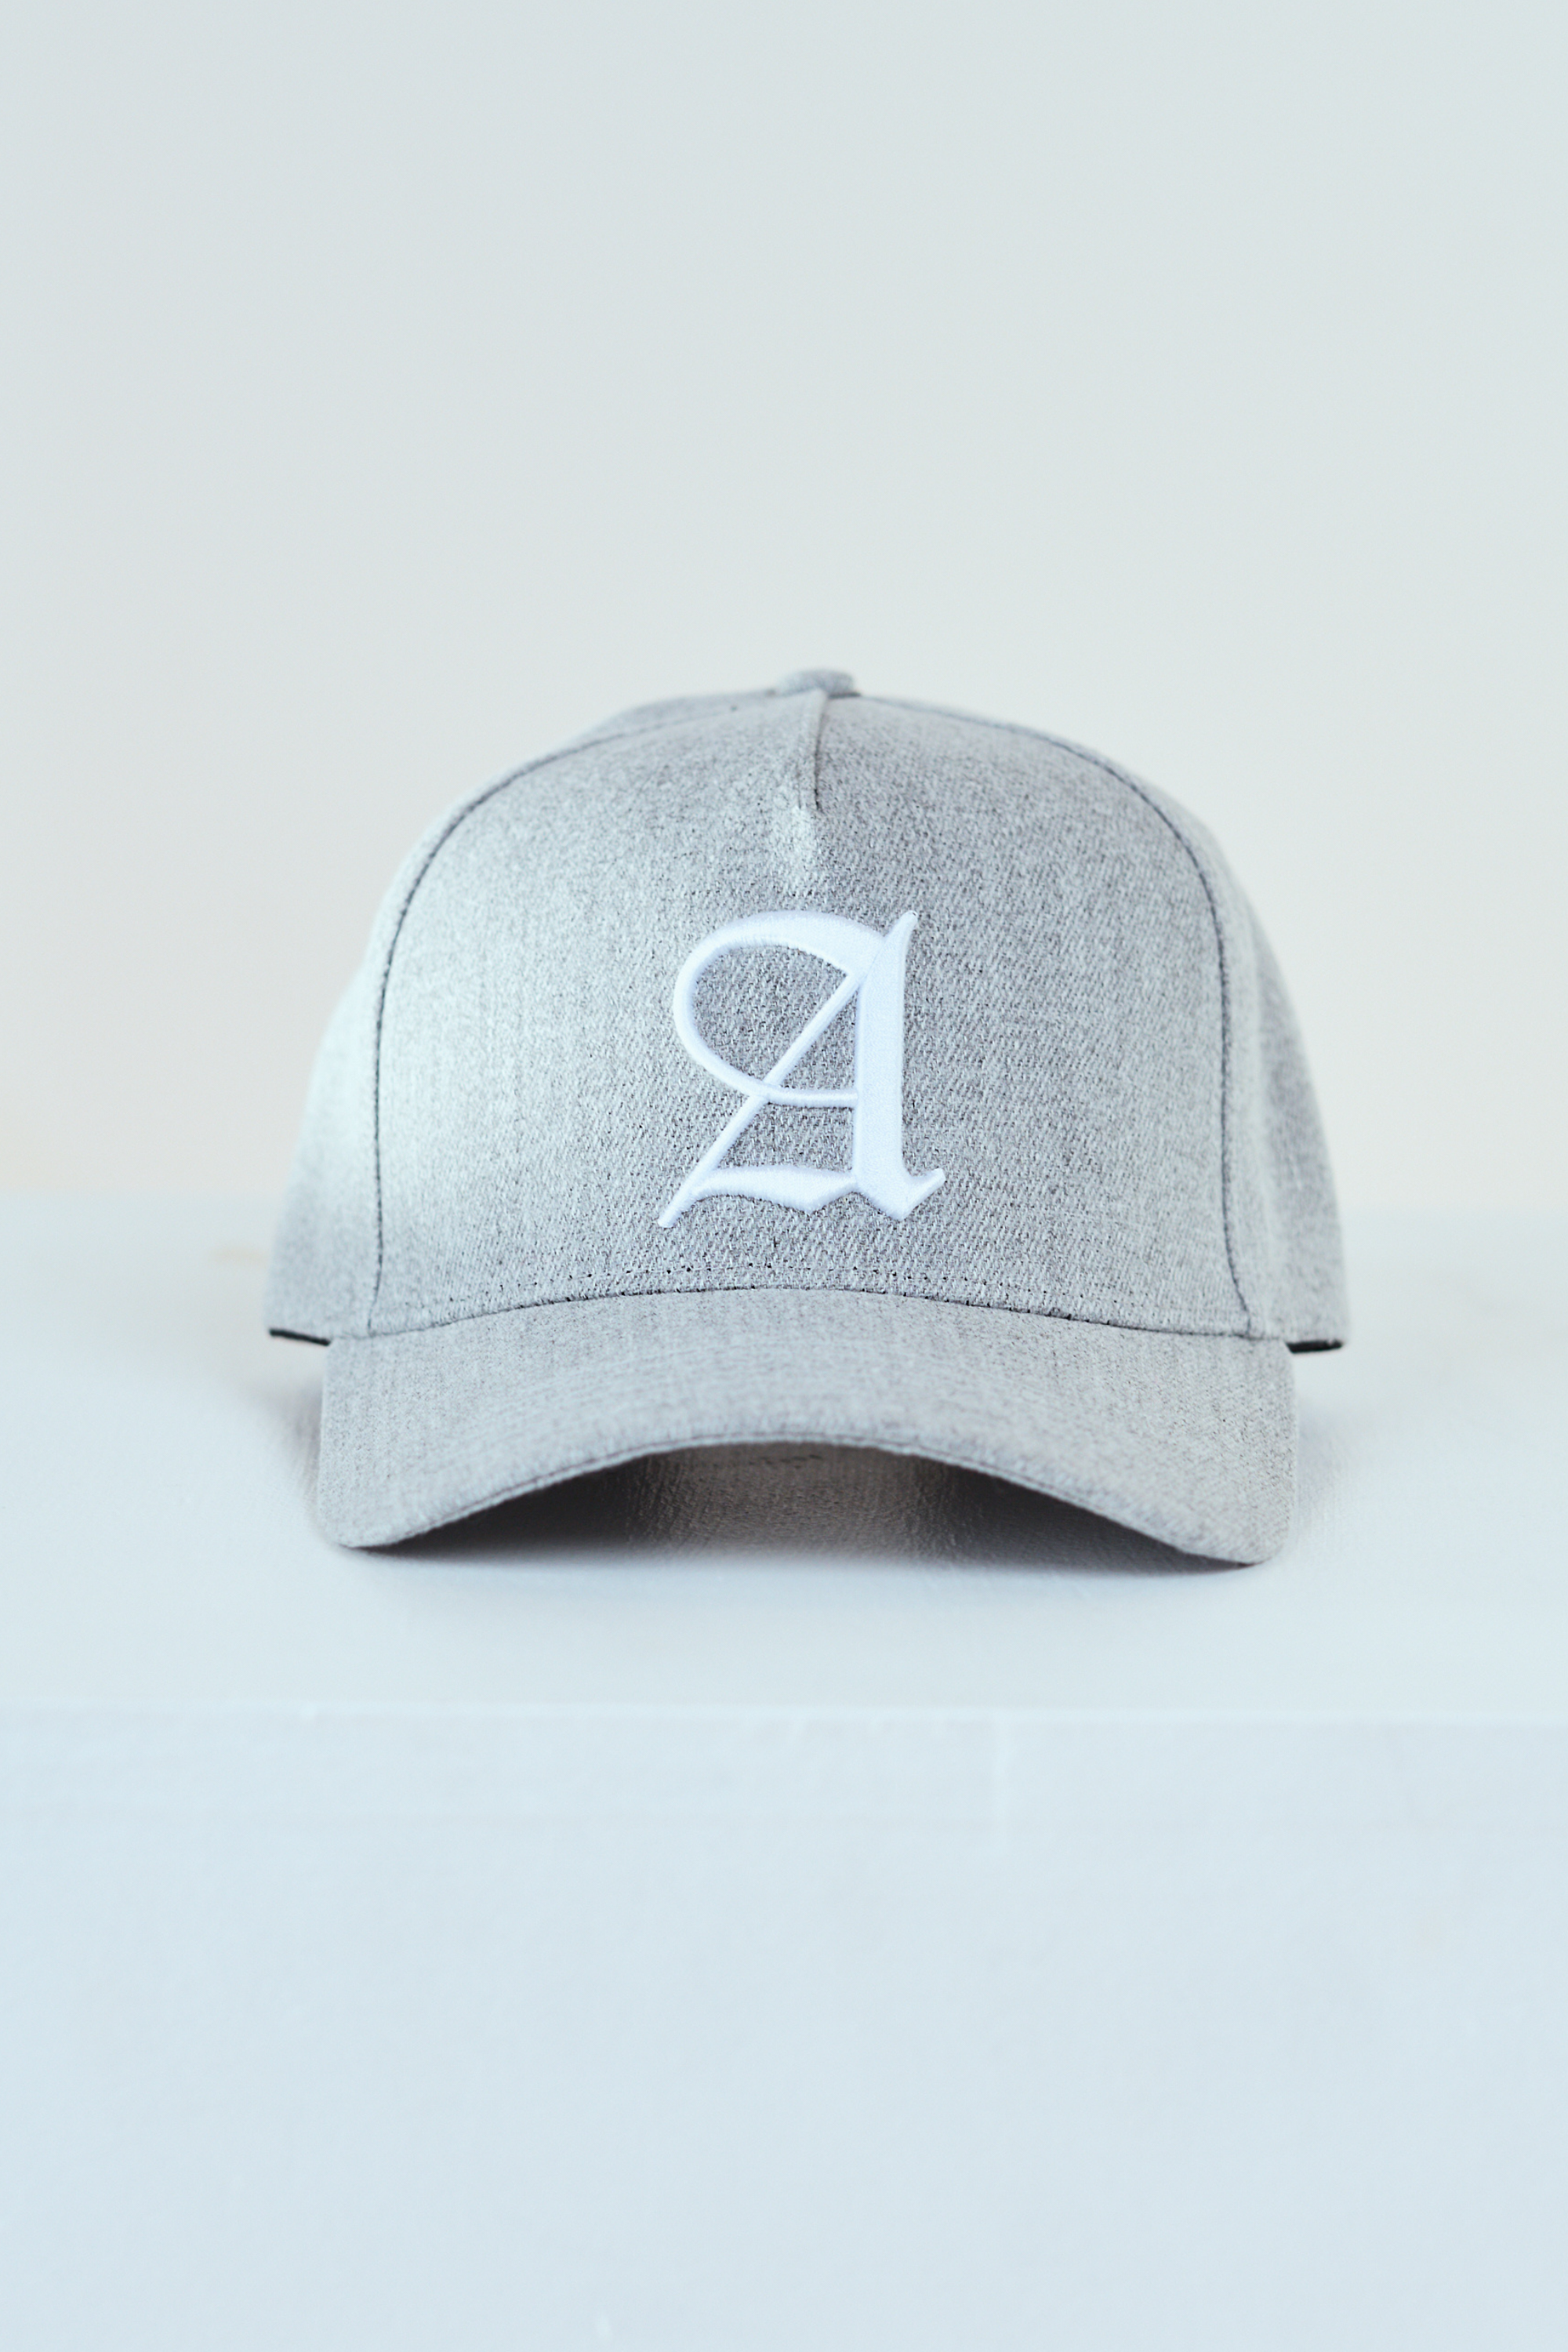 Reign 3D Embroidered Logo Snapback - Grey